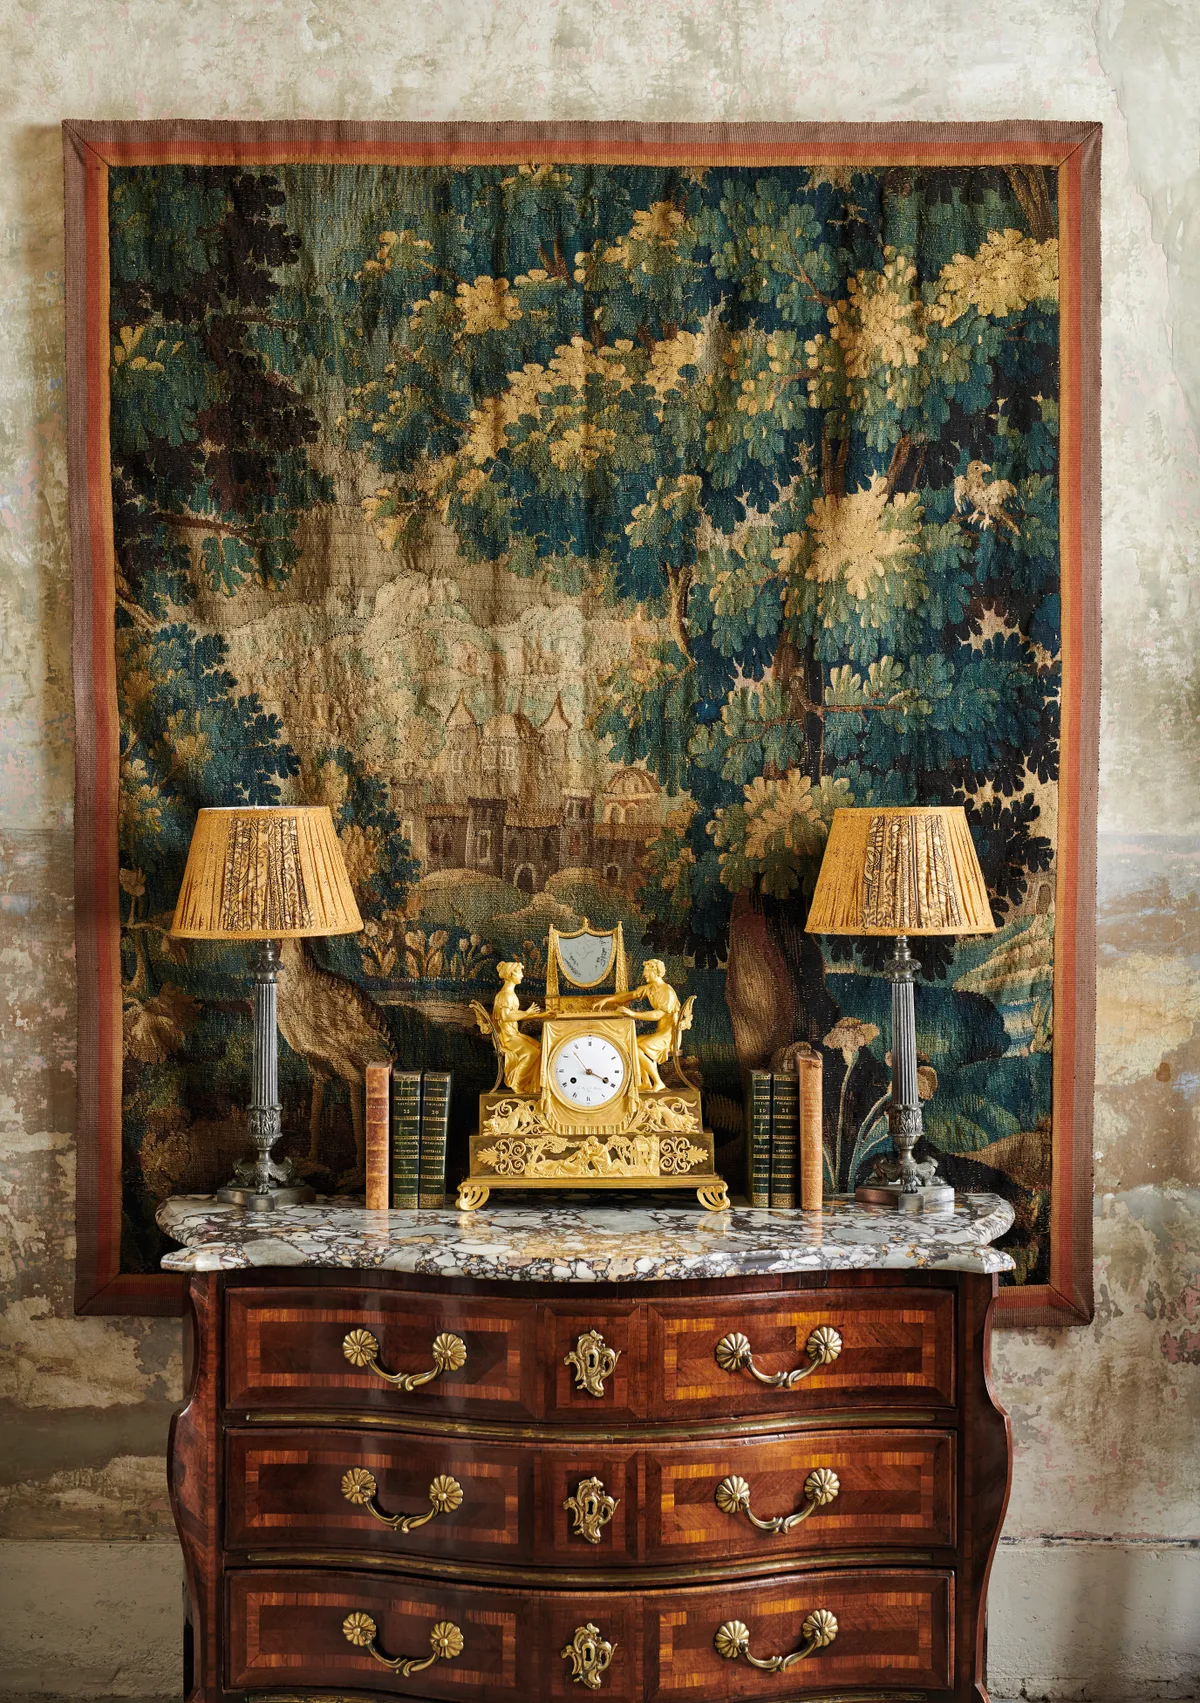 A curved antique commode decorated with an old ormolu clock flanked with table lamps. A large-scale green and brown tapestry hangs behind.